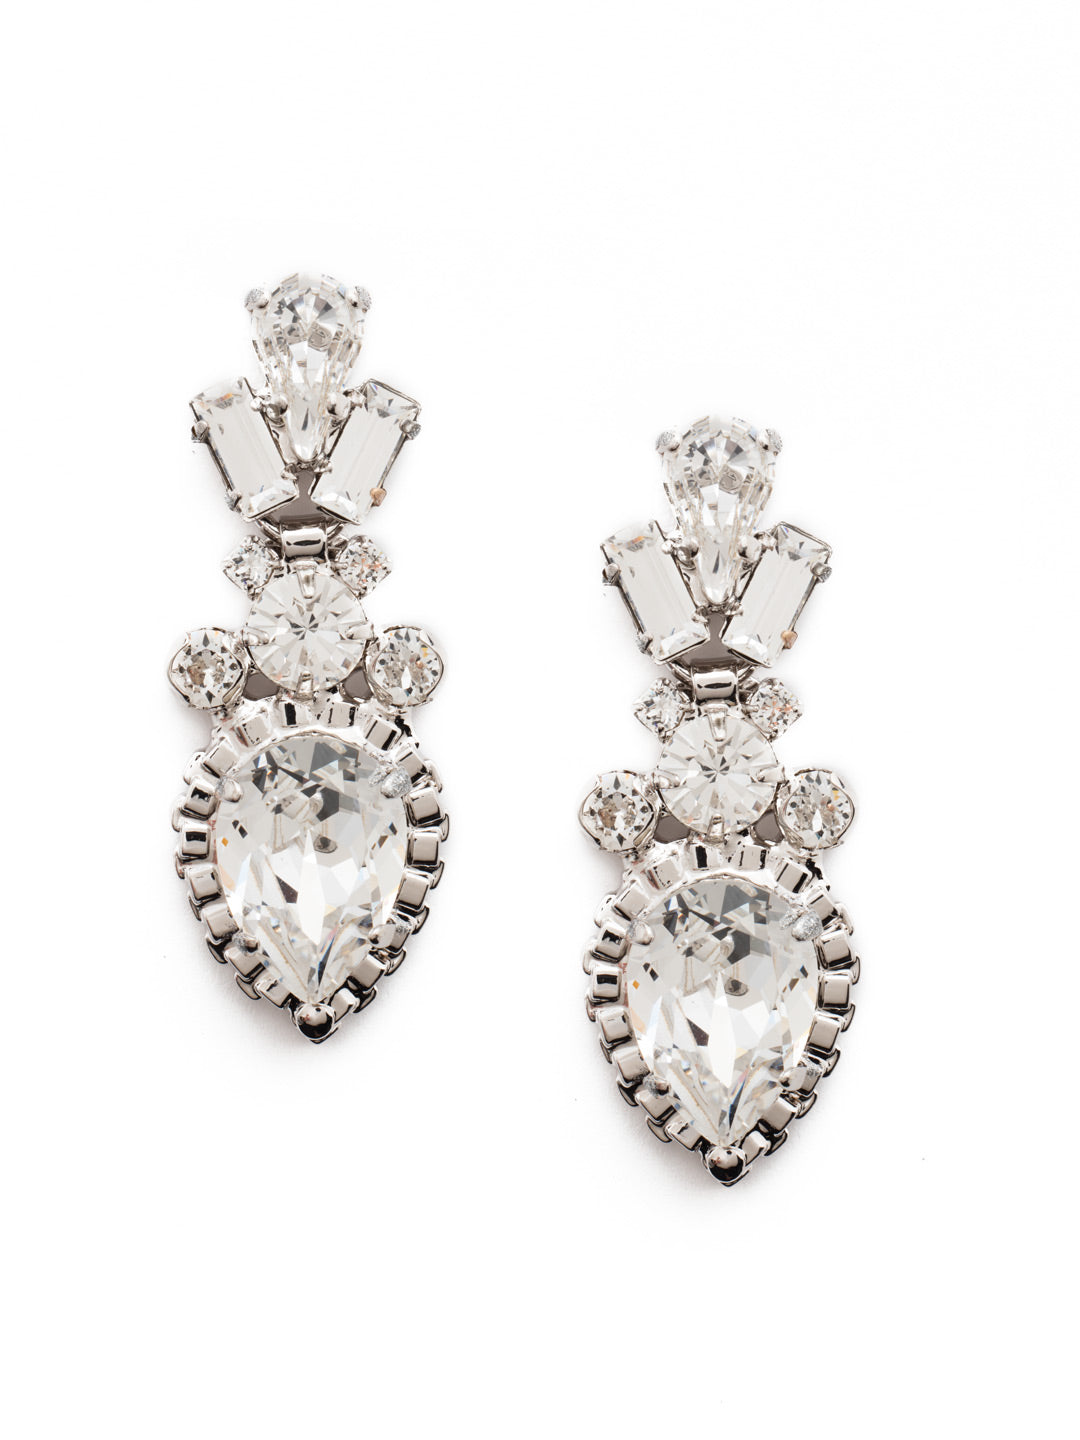 Curb Chain Accented Pear Crystal Dangle Earrings - ECW37RHCRY - <p>A large central pear crystal outlined with curb chain dangles from a cluster of round crystals. Topped with a ray created by two baguette stones on either side of a smaller pear shaped crystal, these exotic baubles will stun and amaze! From Sorrelli's Crystal collection in our Palladium Silver-tone finish.</p>